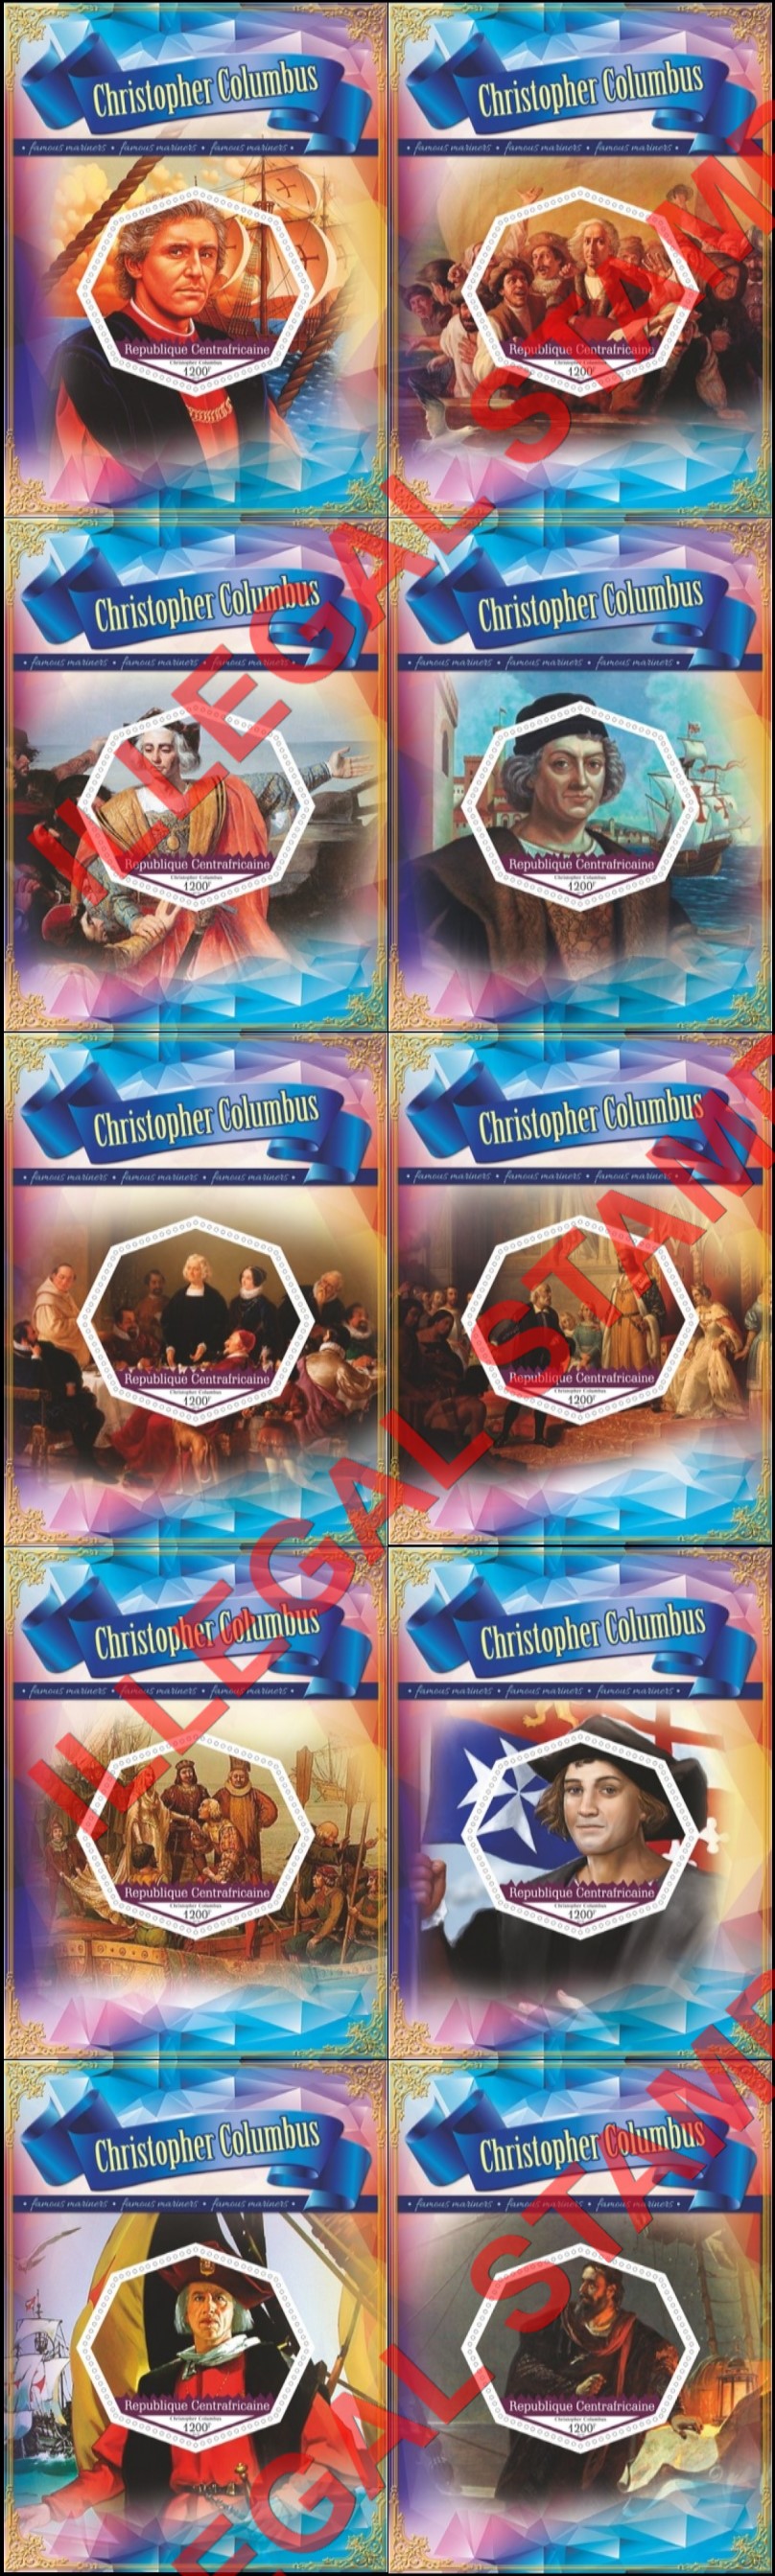 Central African Republic 2019 Christopher Columbus Illegal Stamp Souvenir Sheets of 1